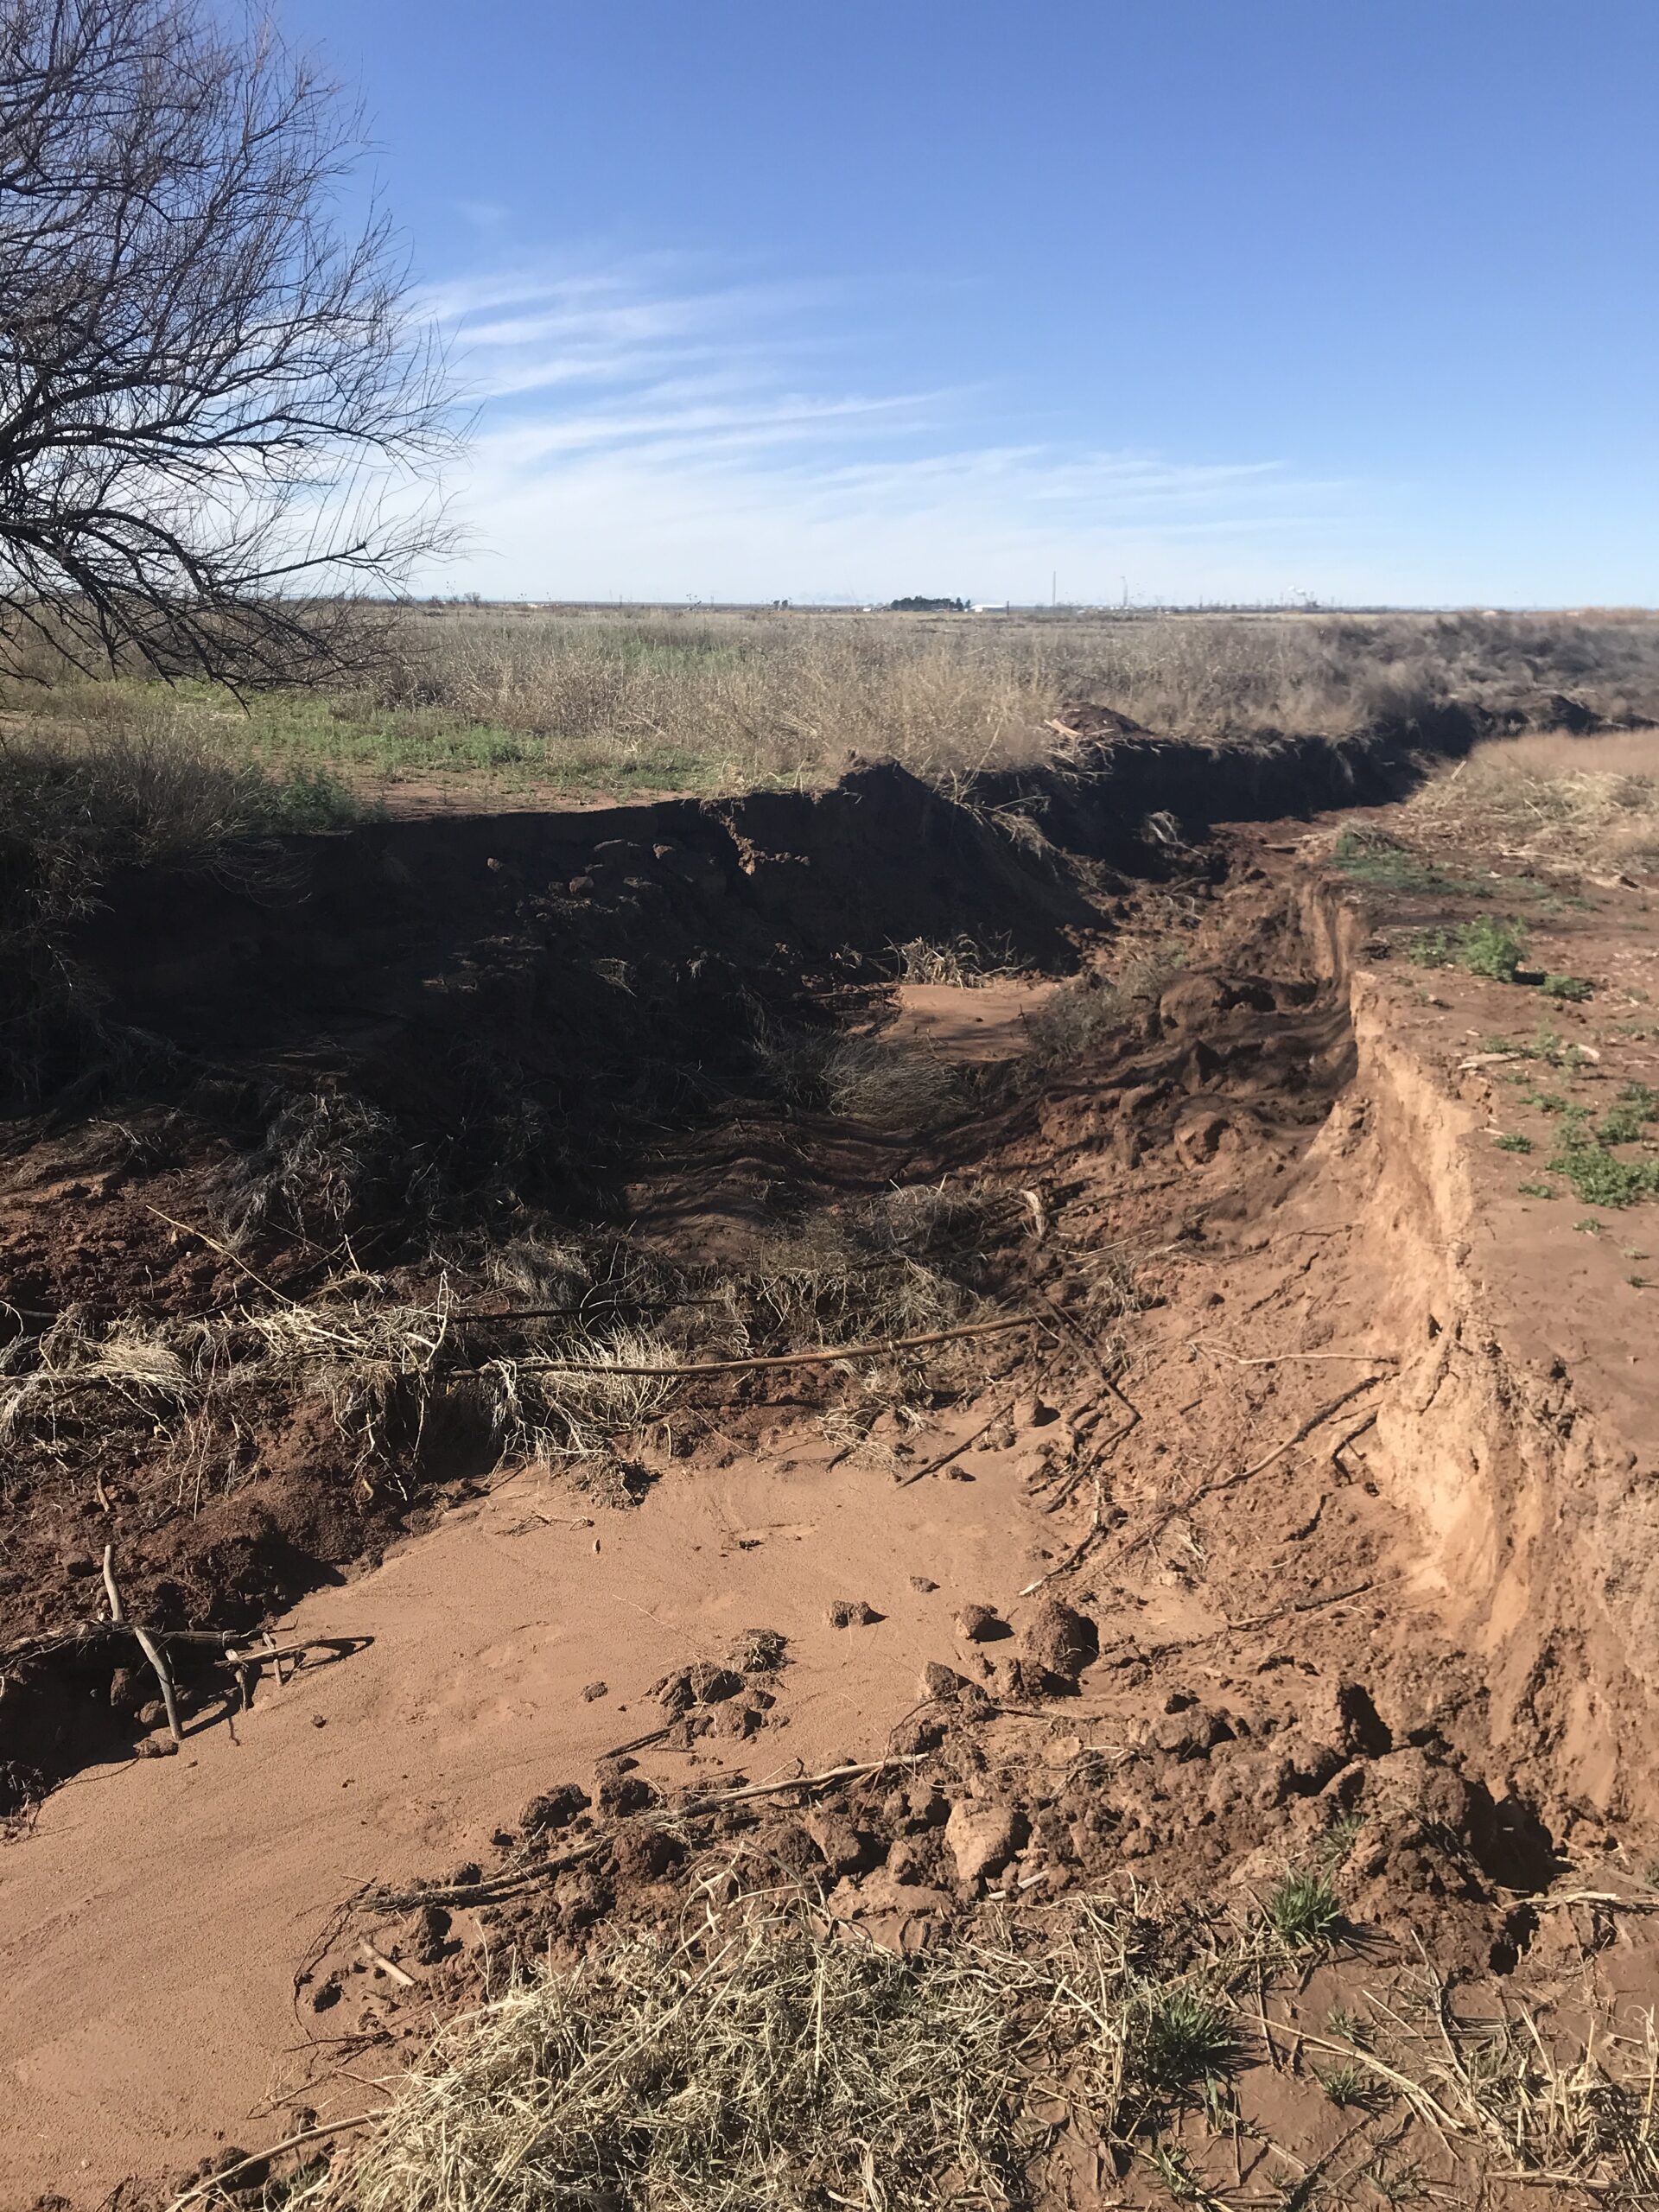 In 2019, Pecos River floodwater poured into an old riverbed, bypassing the designed spillway back to the river and creating a huge washout area.